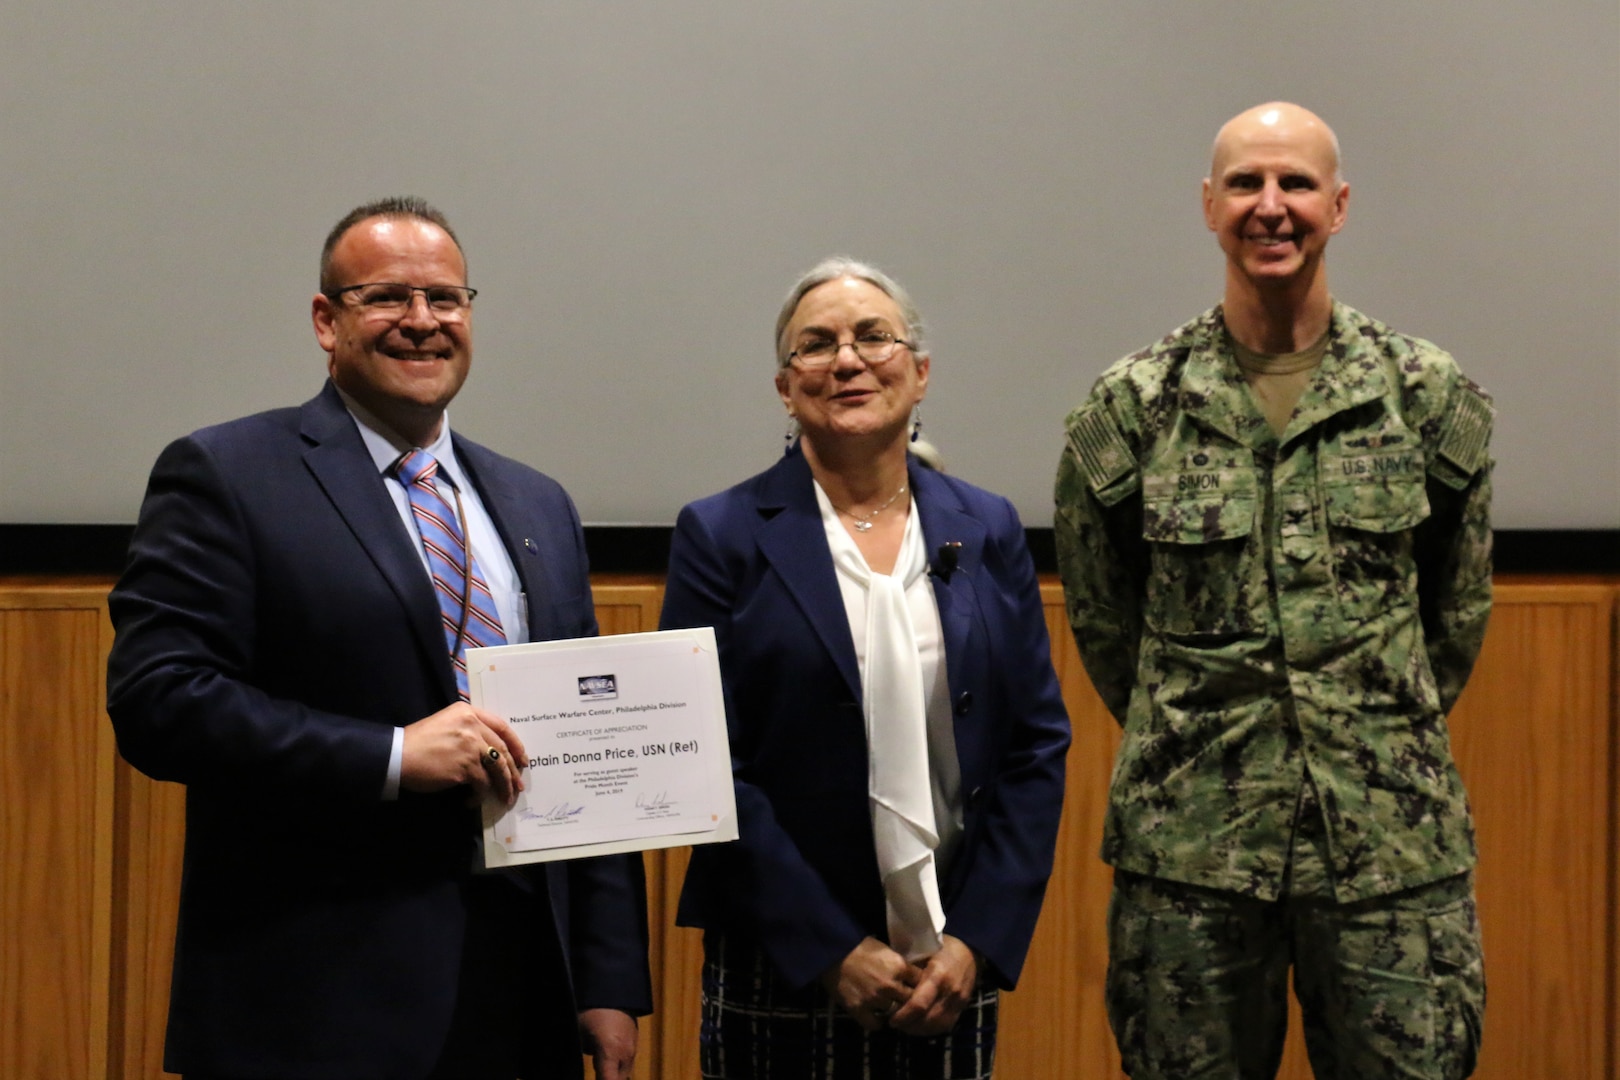 Philadelphia (June 4, 2019) Naval Surface Warfare Center, Philadelphia Division (NSWCPD) hosted keynote speaker Capt. Donna Price, United States Navy, (retired) during the Command’s annual Lesbian, Gay, Bisexual, Transgender (LGBT) Pride Month event on June 4. Price (middle) accepted a Certificate of Appreciation from NSWCPD’s Technical Director Mr. Tom Perotti (left) and NSWCPD’s Commanding Officer Capt. Dana F. Simon (right). (U.S. Navy photo by Kirsten St. Peter)/Released